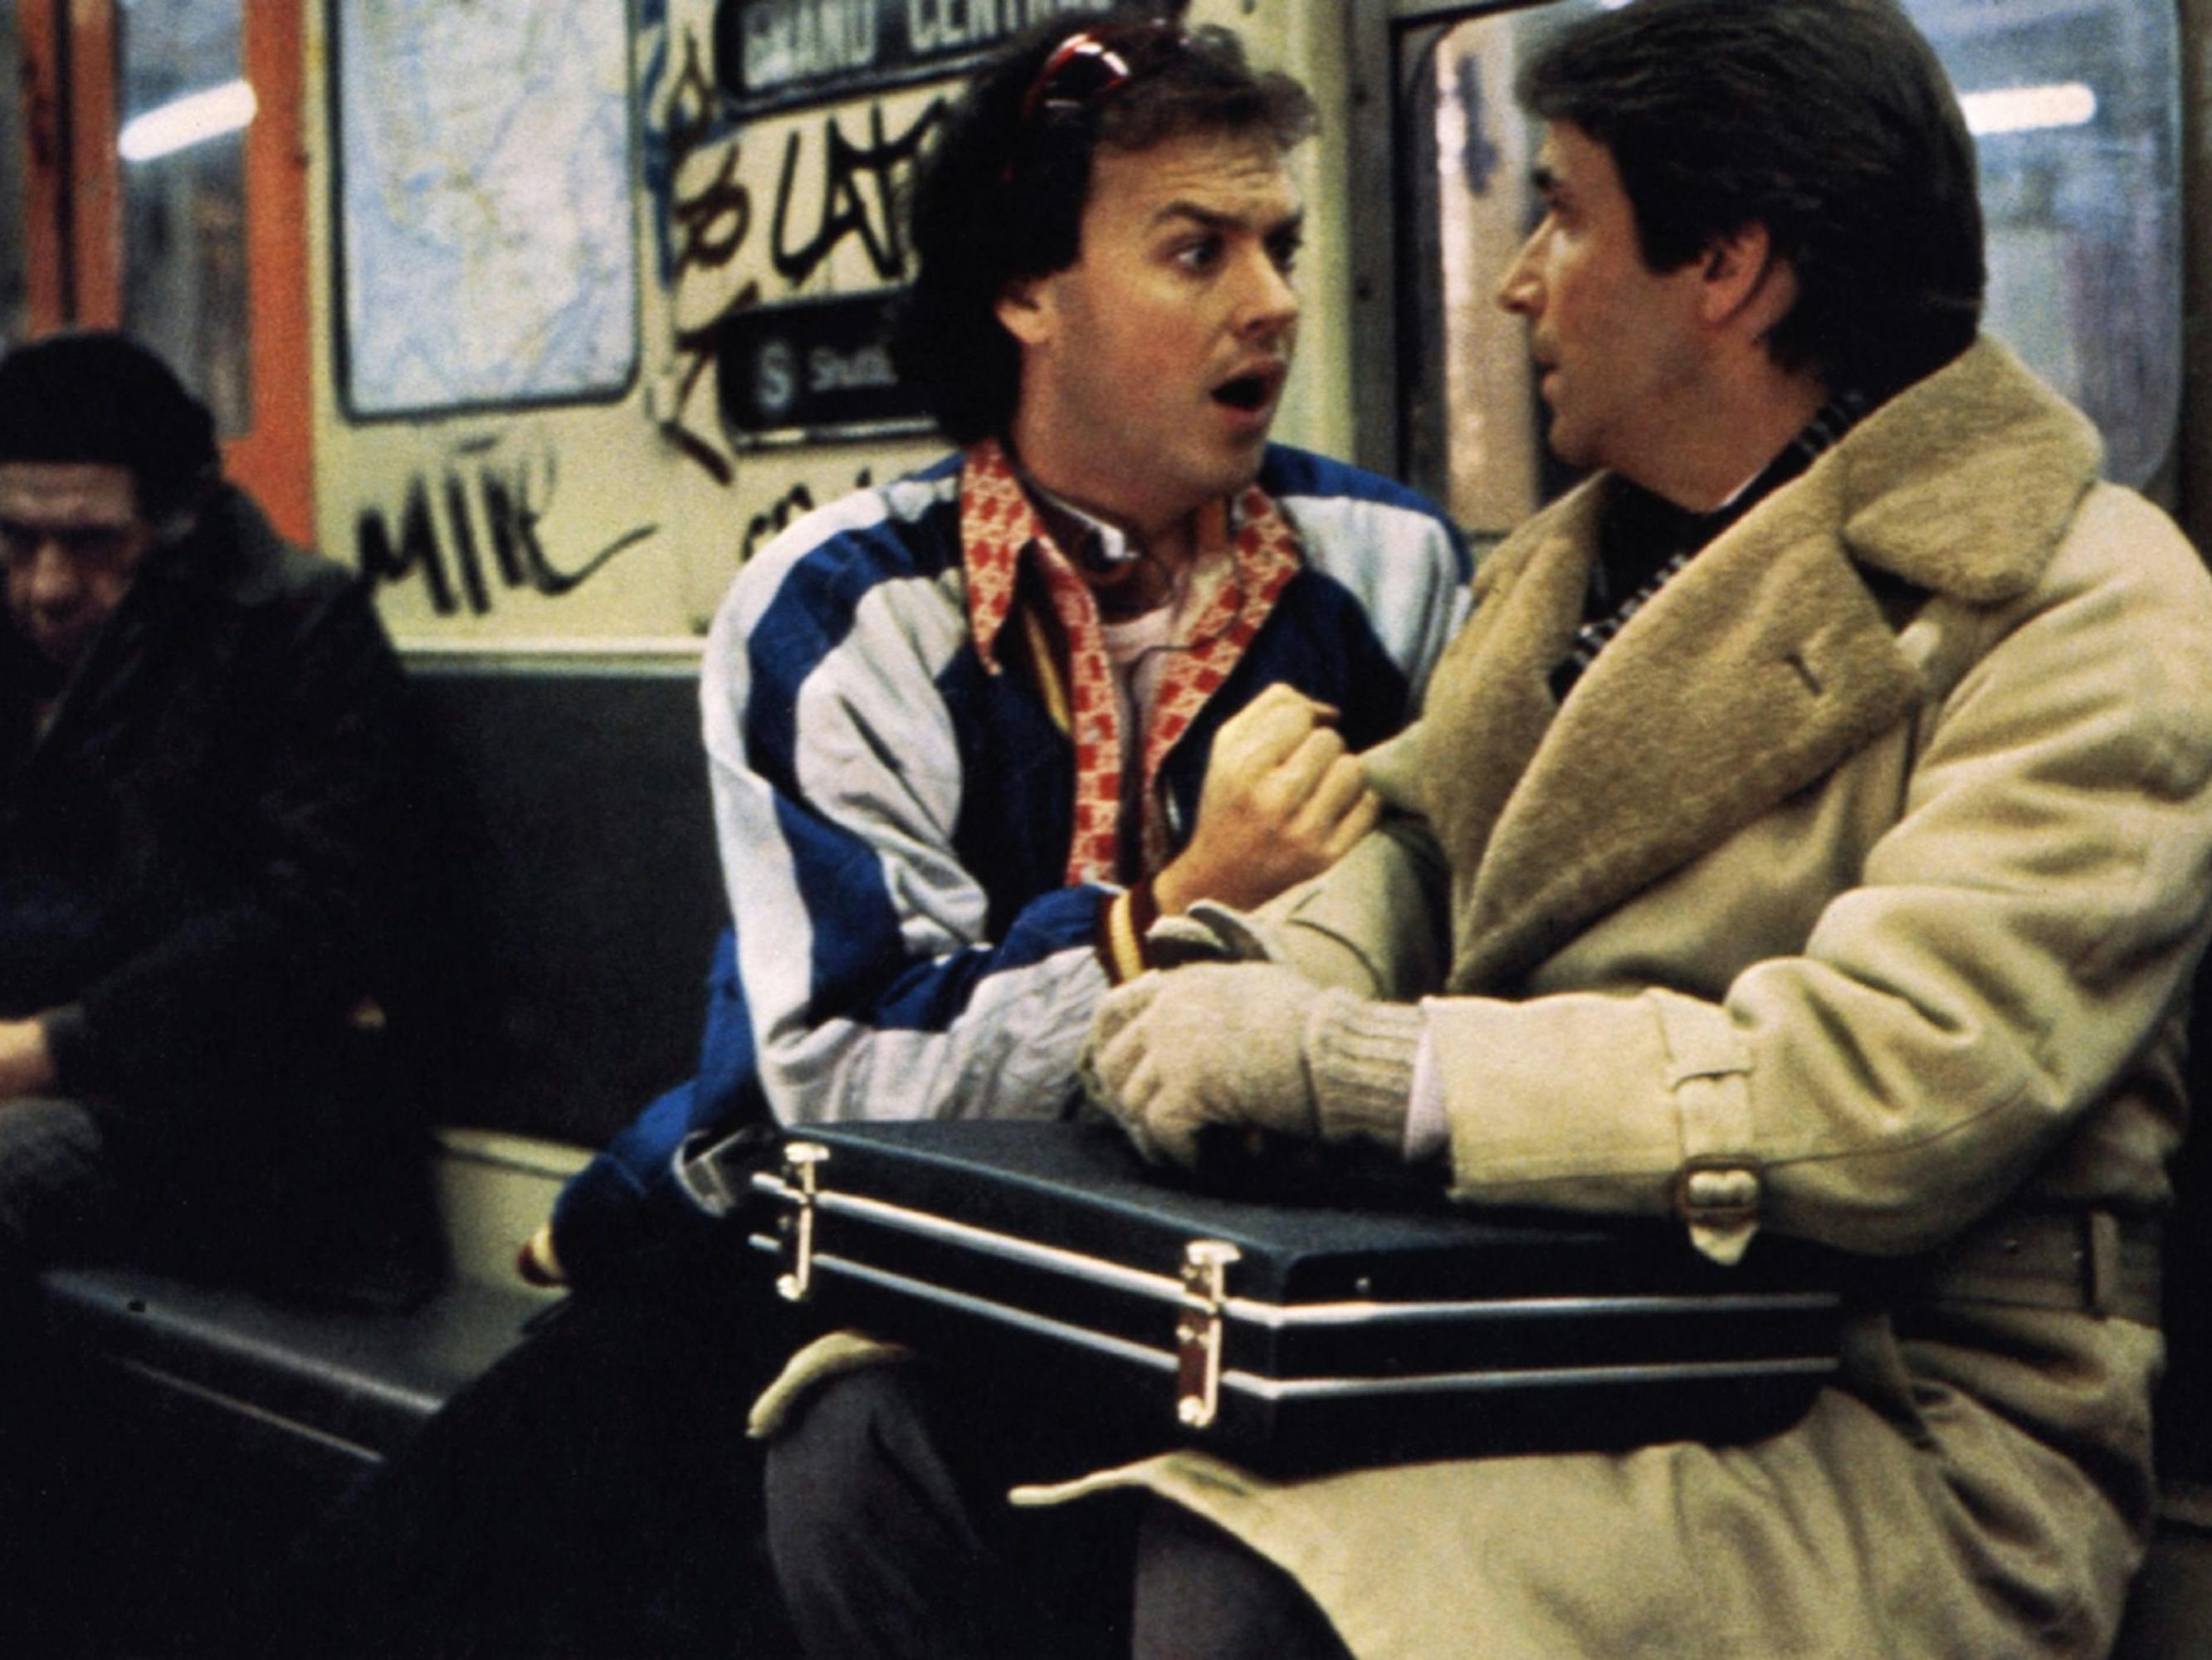 Bill Blazejowski (Michael Keaton) and Chuck Lumley (Henry Winkler) in Night Shift. They sit on a train, and Keaton looks at Winkler with urgency. Winkler lies a black briefcase across his lap.